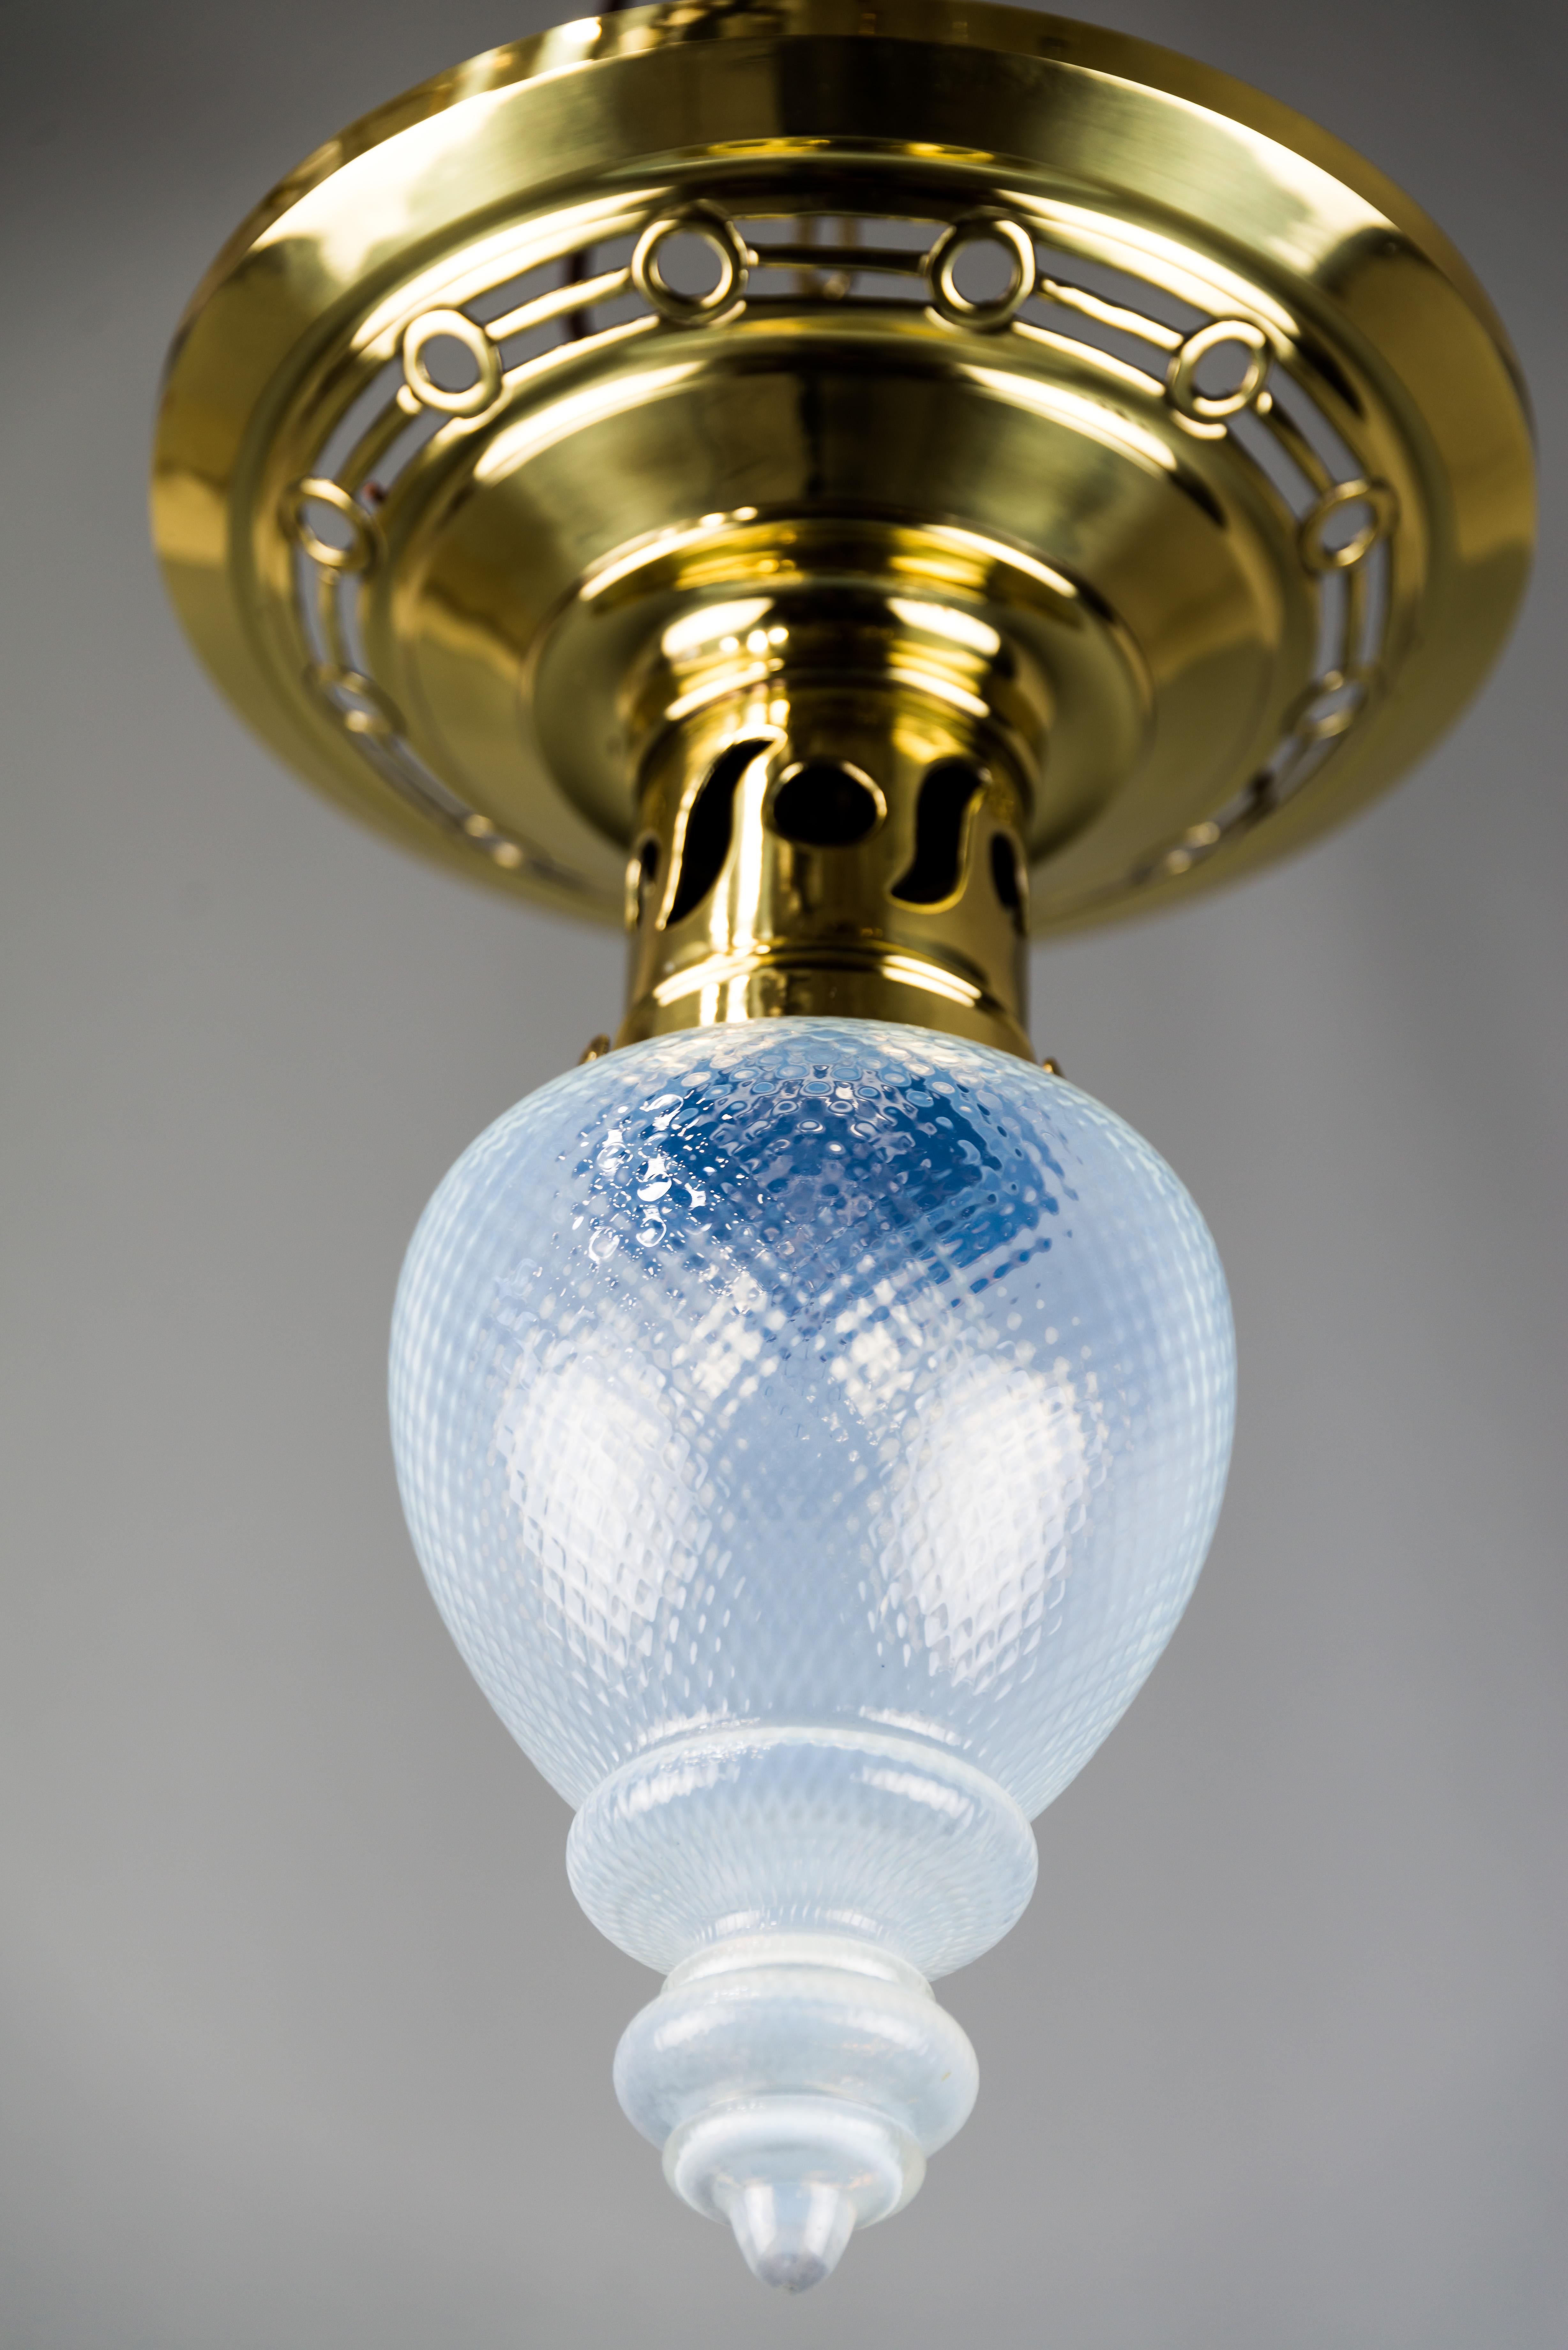 Lacquered Jugendstil Ceiling Lamp circa 1908 with Original Opaline Glass Shade